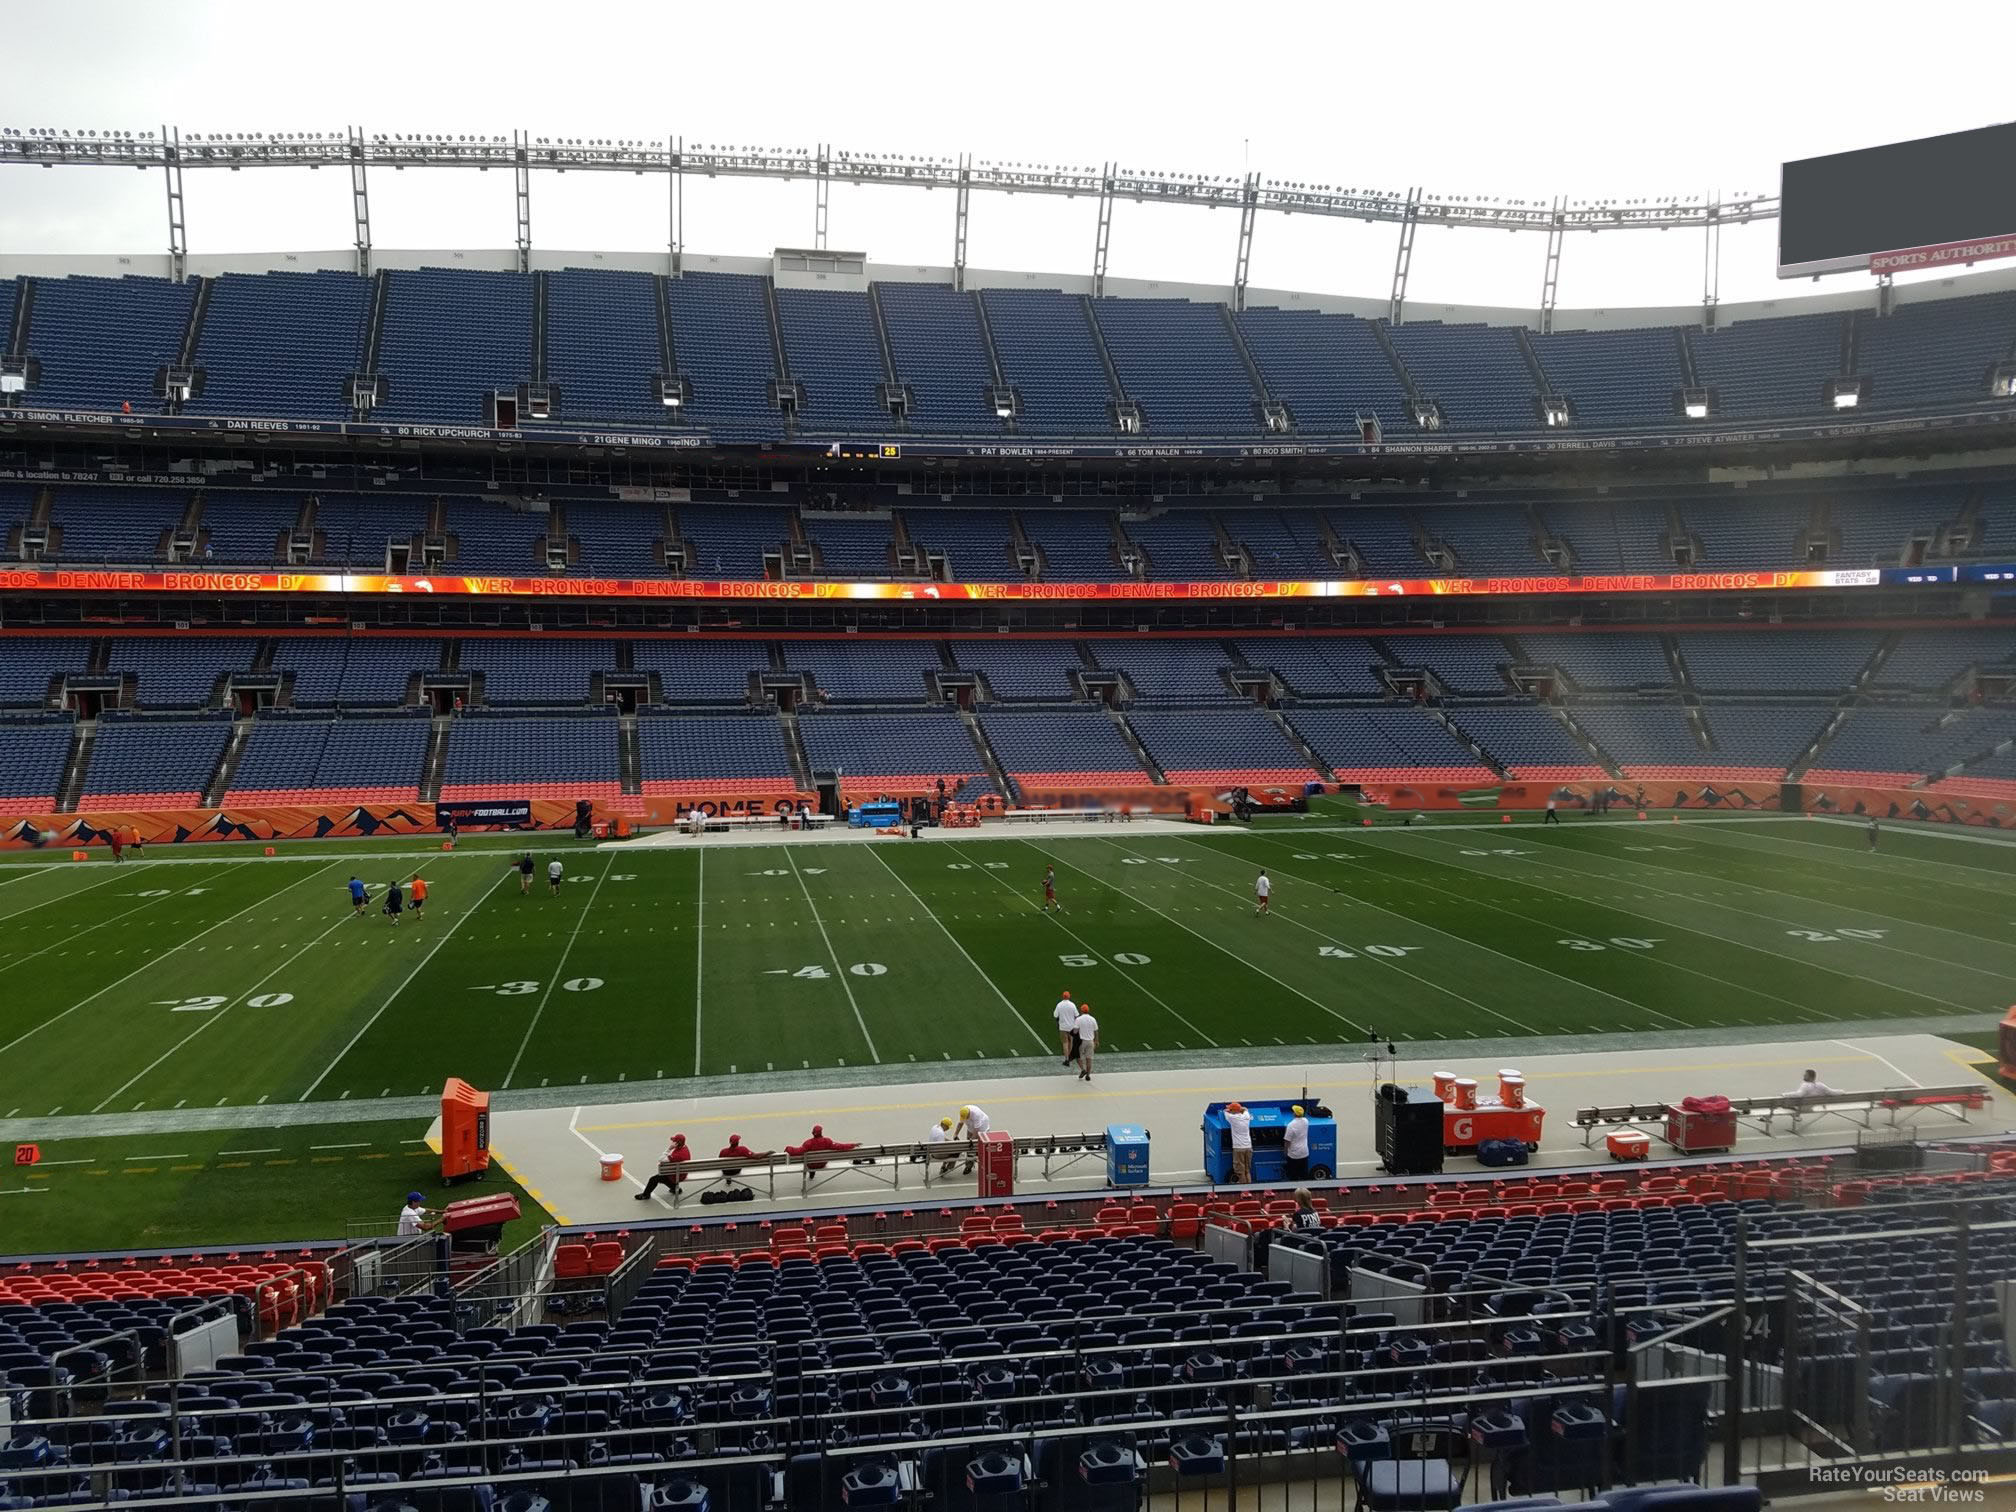 section 124, row 30 seat view  - empower field (at mile high)